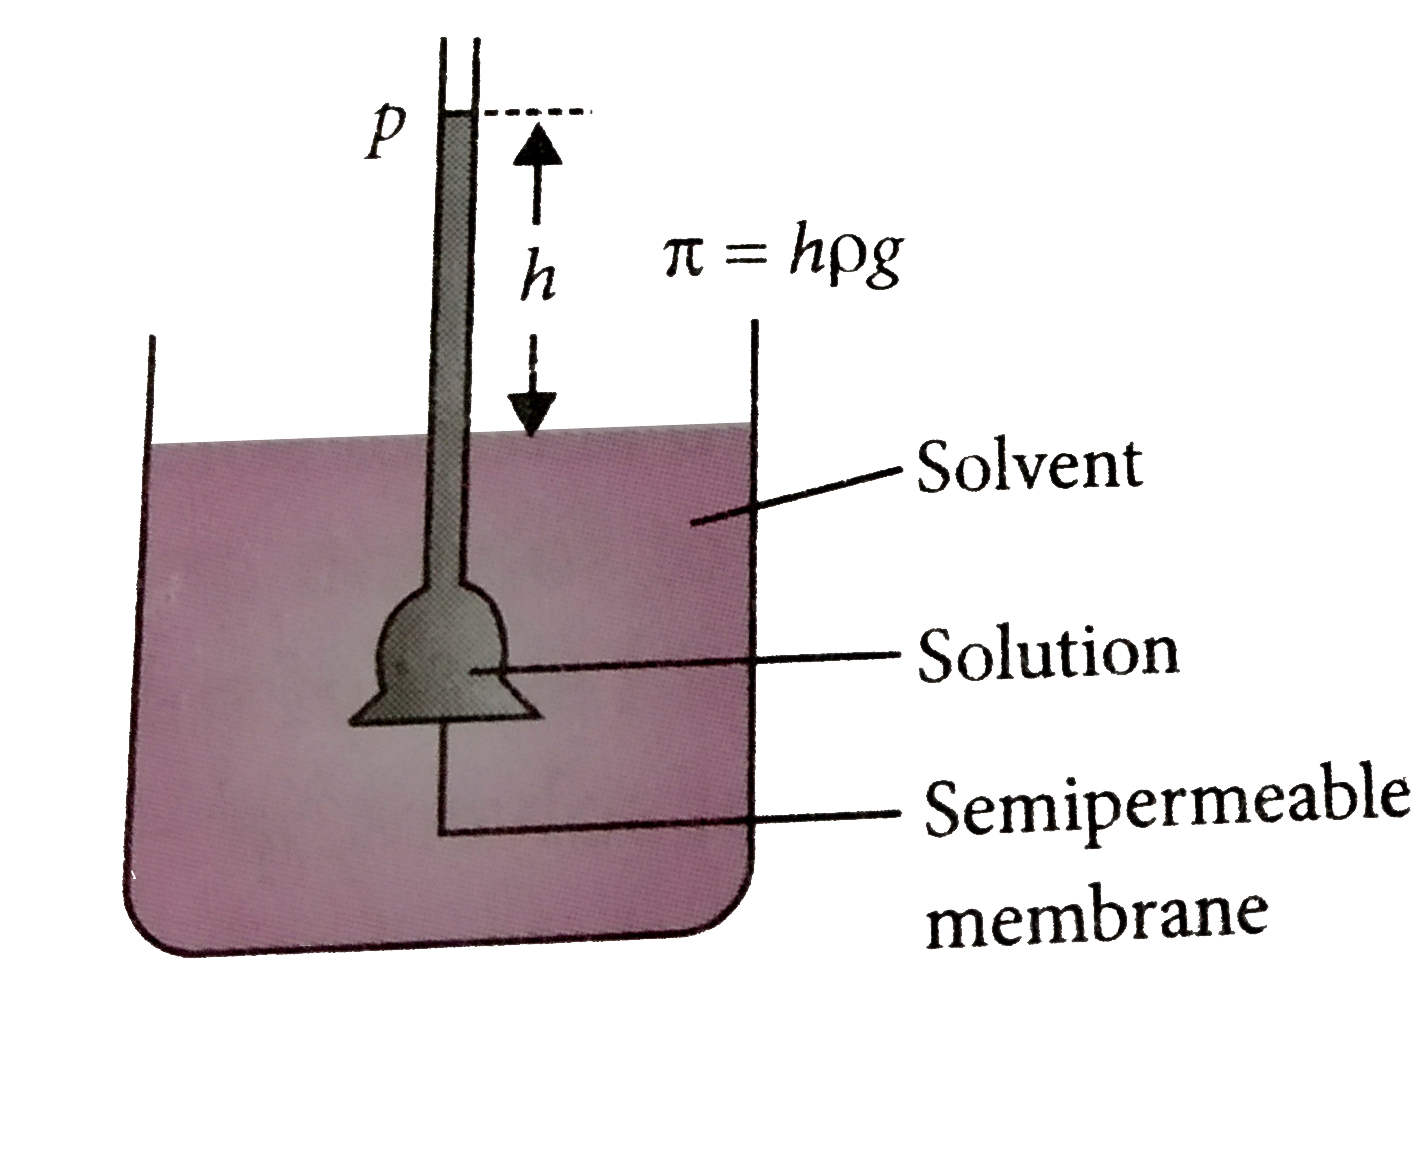 If semipermeable membrane is placed between the solvent and solution as shown in the given figure then